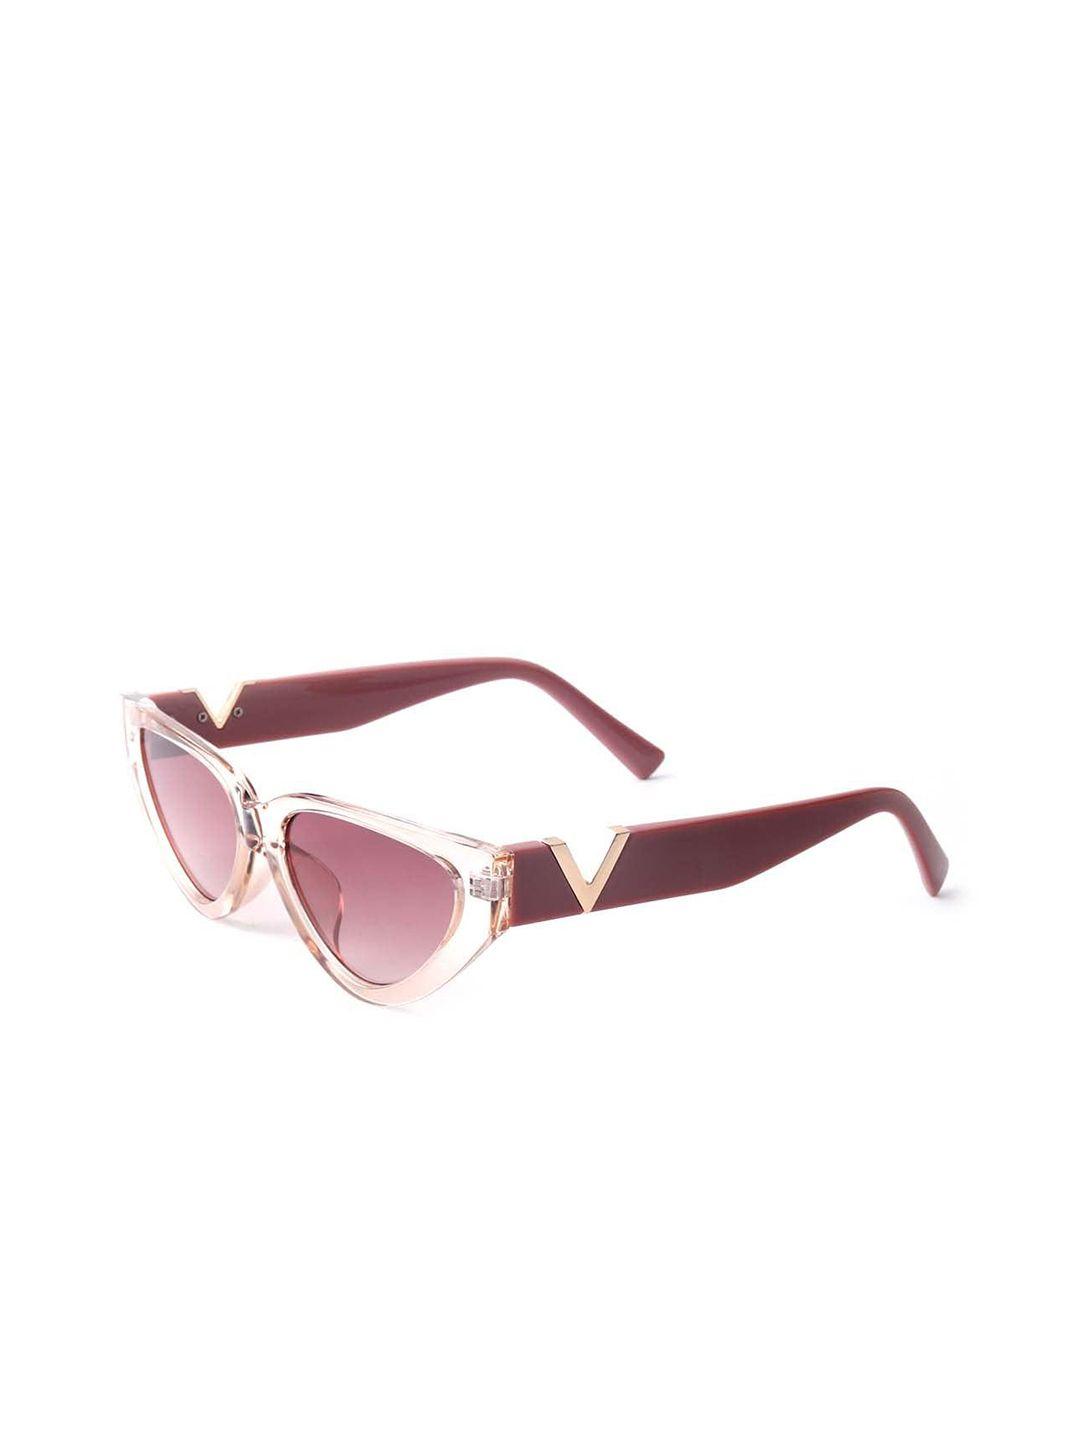 odette cateye sunglasses with uv protected lens